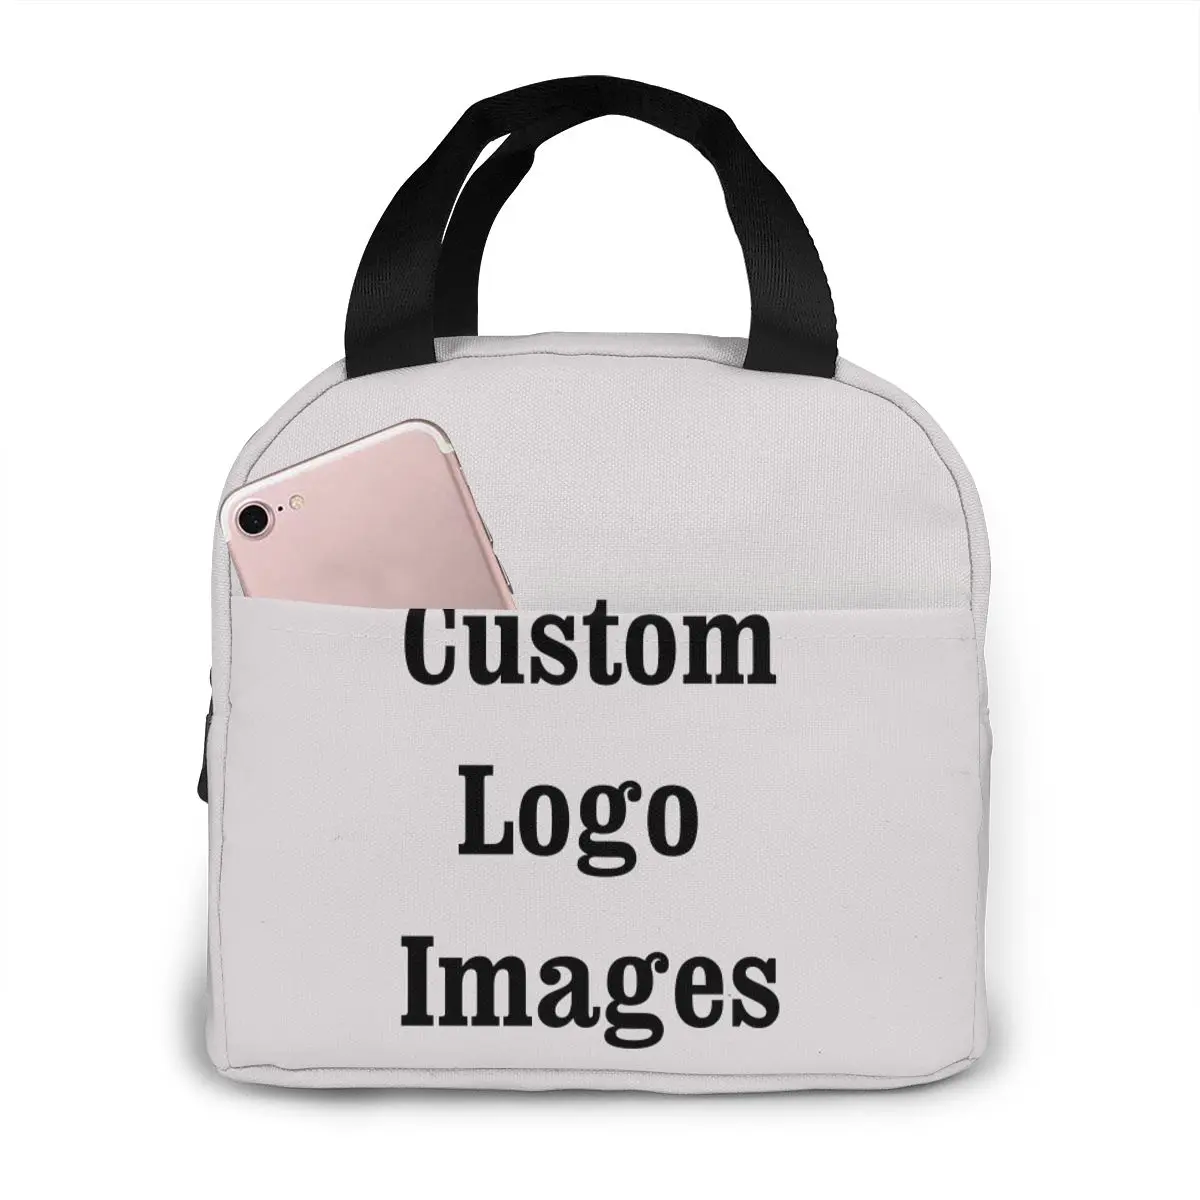 Custom Logo Cooler Lunch Bag Pattern Print Girls Boys Portable Thermal Food Picnic Bags for School Work Tote Box Dropshipping little nightmares lunch bag 3d game print design cartoon boys girls portable thermal food picnic bags kids school tote